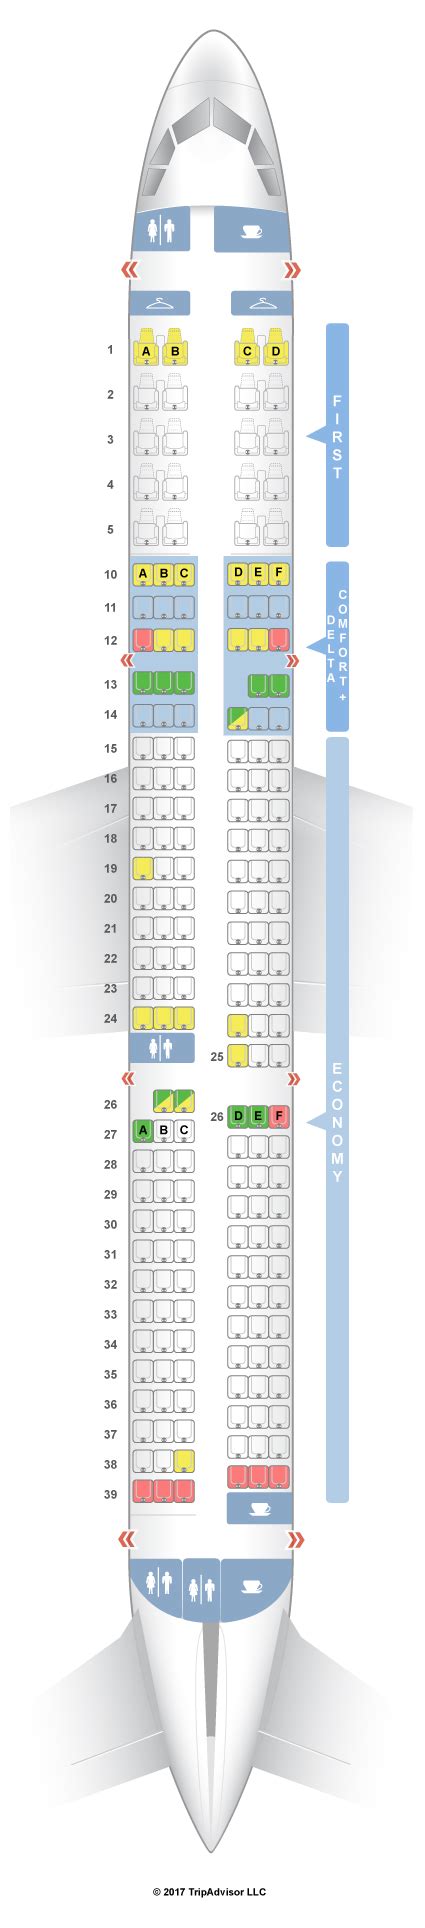 Delta airbus a321 seat guru. For your next Delta flight, use this seating chart to get the most comfortable seats, legroom, ... Airbus A321 (321) Layout 1; Airbus A321 (321) Layout 2; Airbus A330-200 (332) Airbus A330-300 (333) ... SeatGuru provides maps for each version. Versions can be verified by looking at the live seat maps on the Delta site which show specific seat ... 